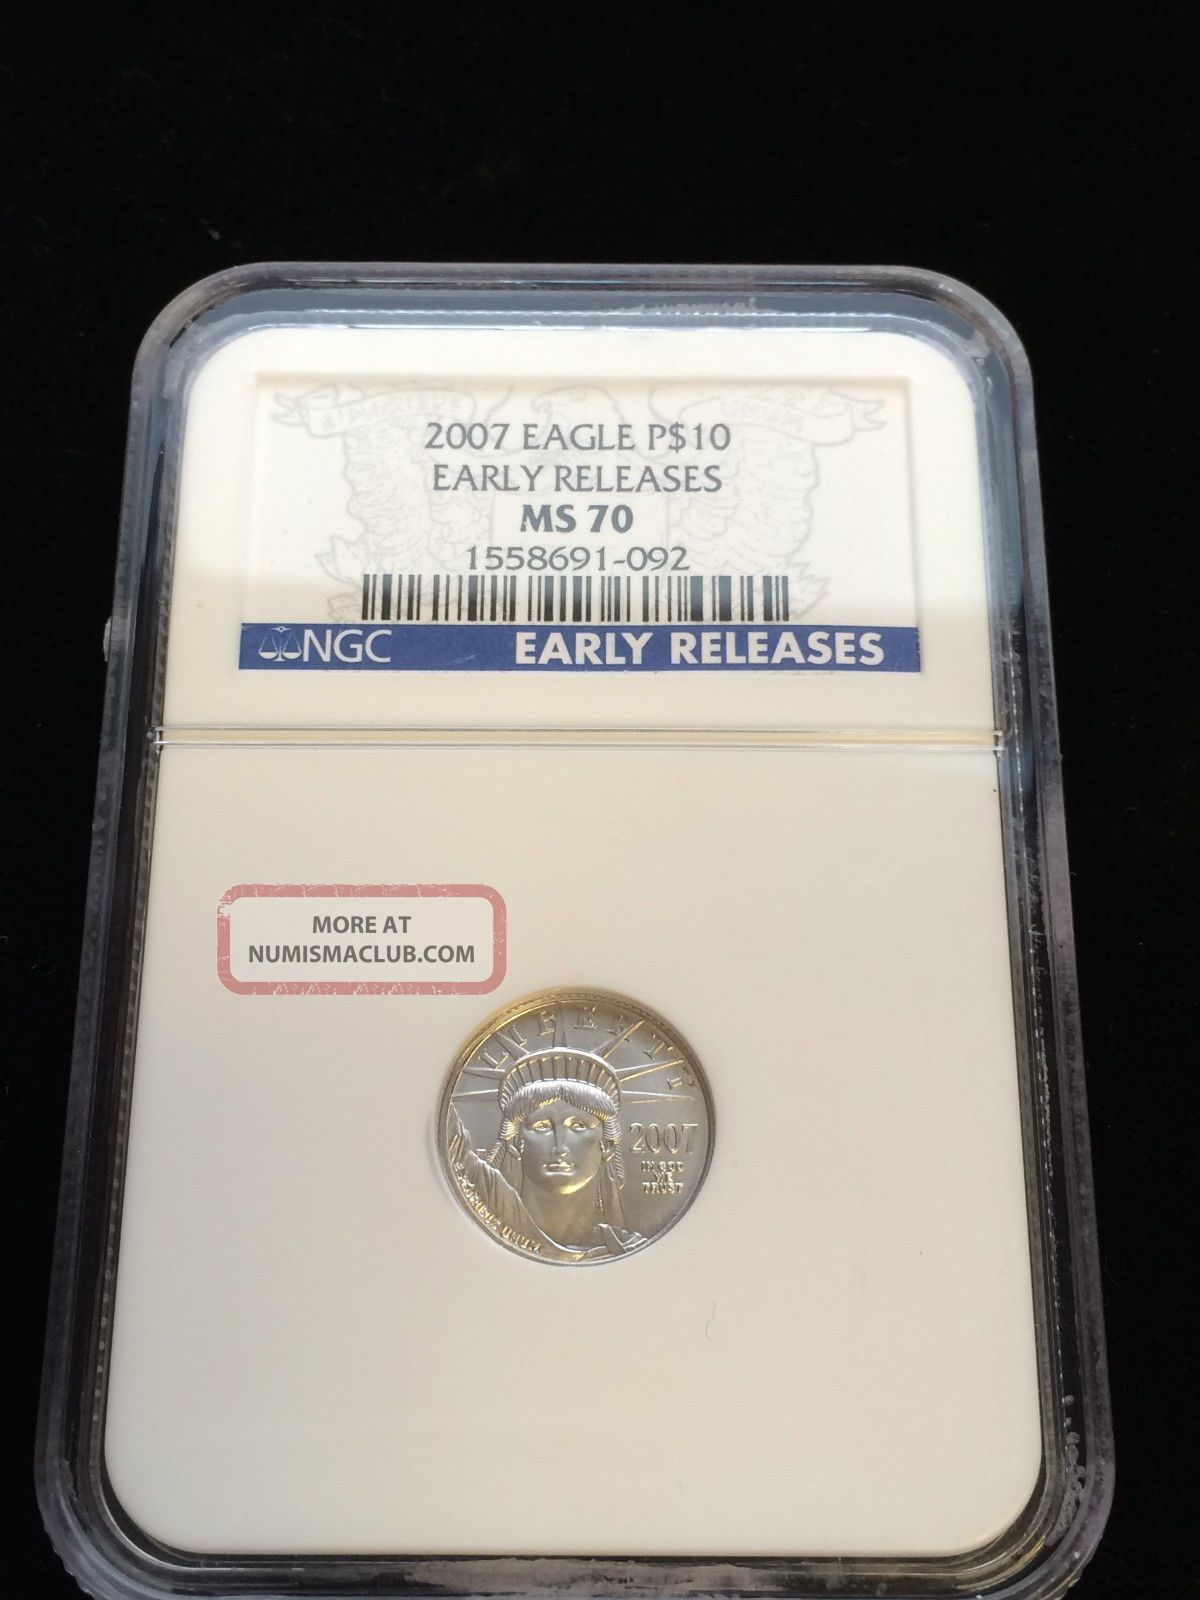 2007 Platinum Eagle P$10 Early Releases Ngc Ms 70 691 - 092